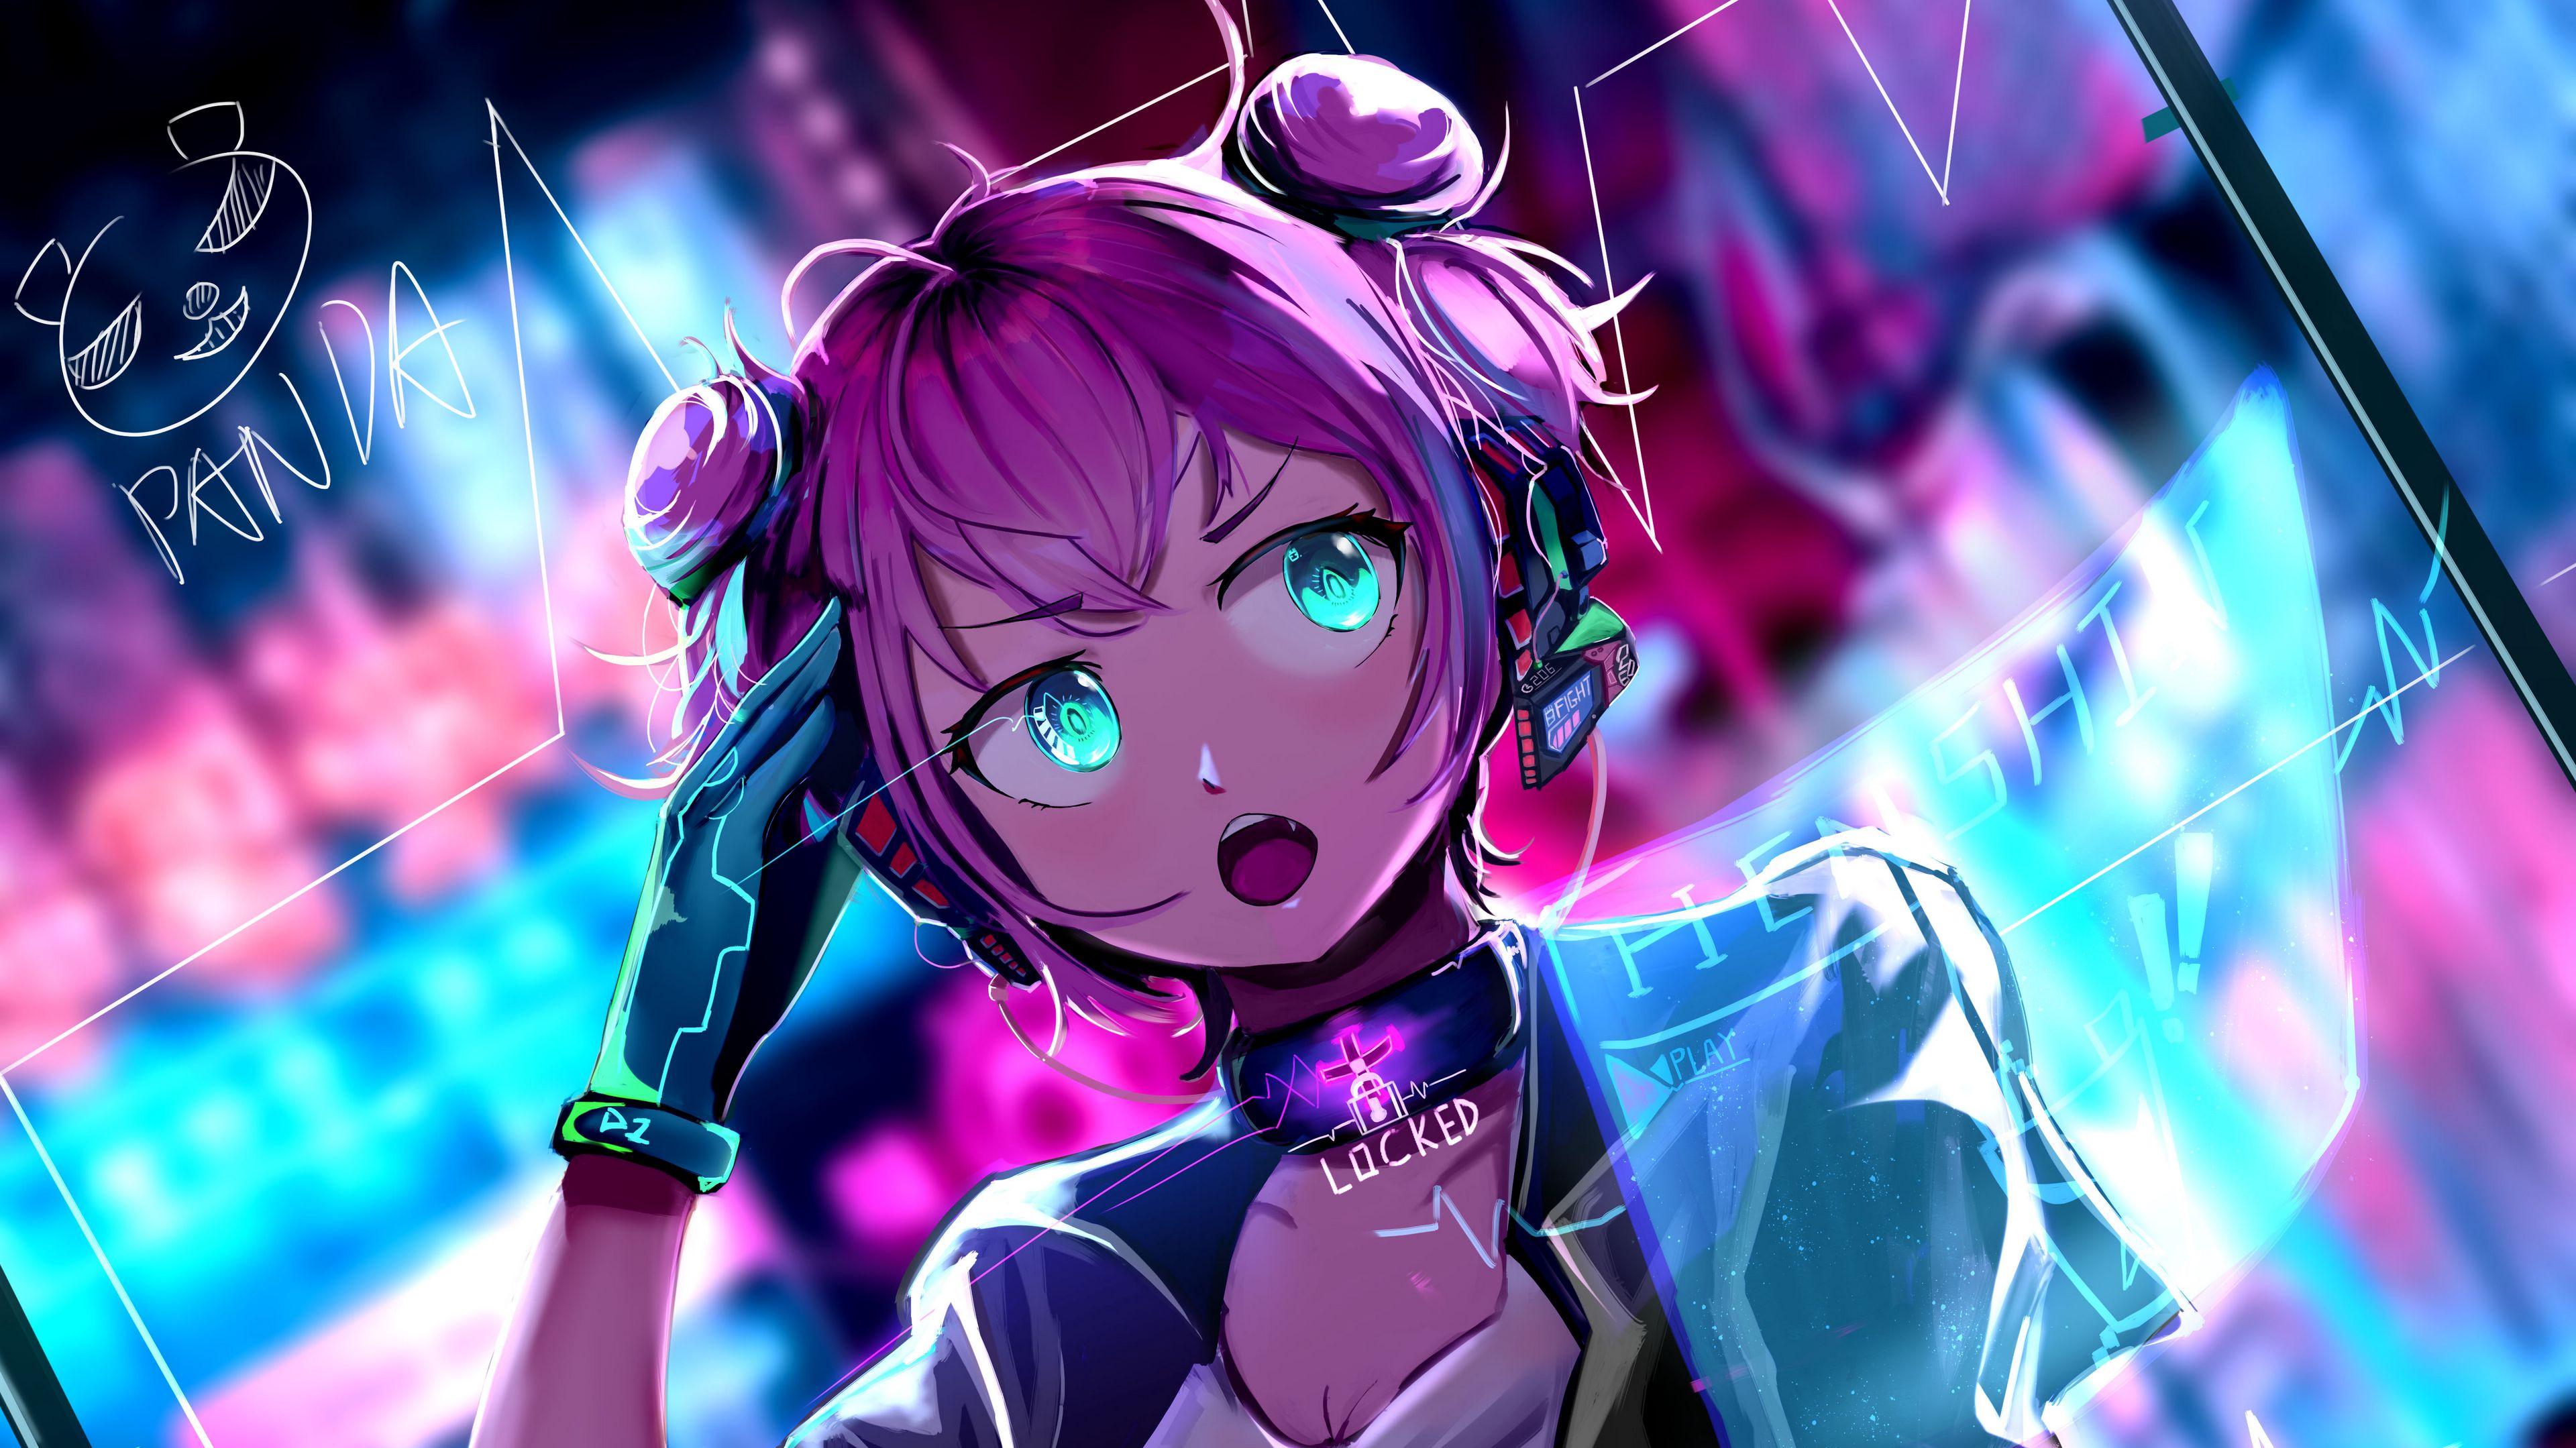 Wallpaper Soundcloud, Cyberpunk, Art, Colored, Anime, Background - Download  Free Image